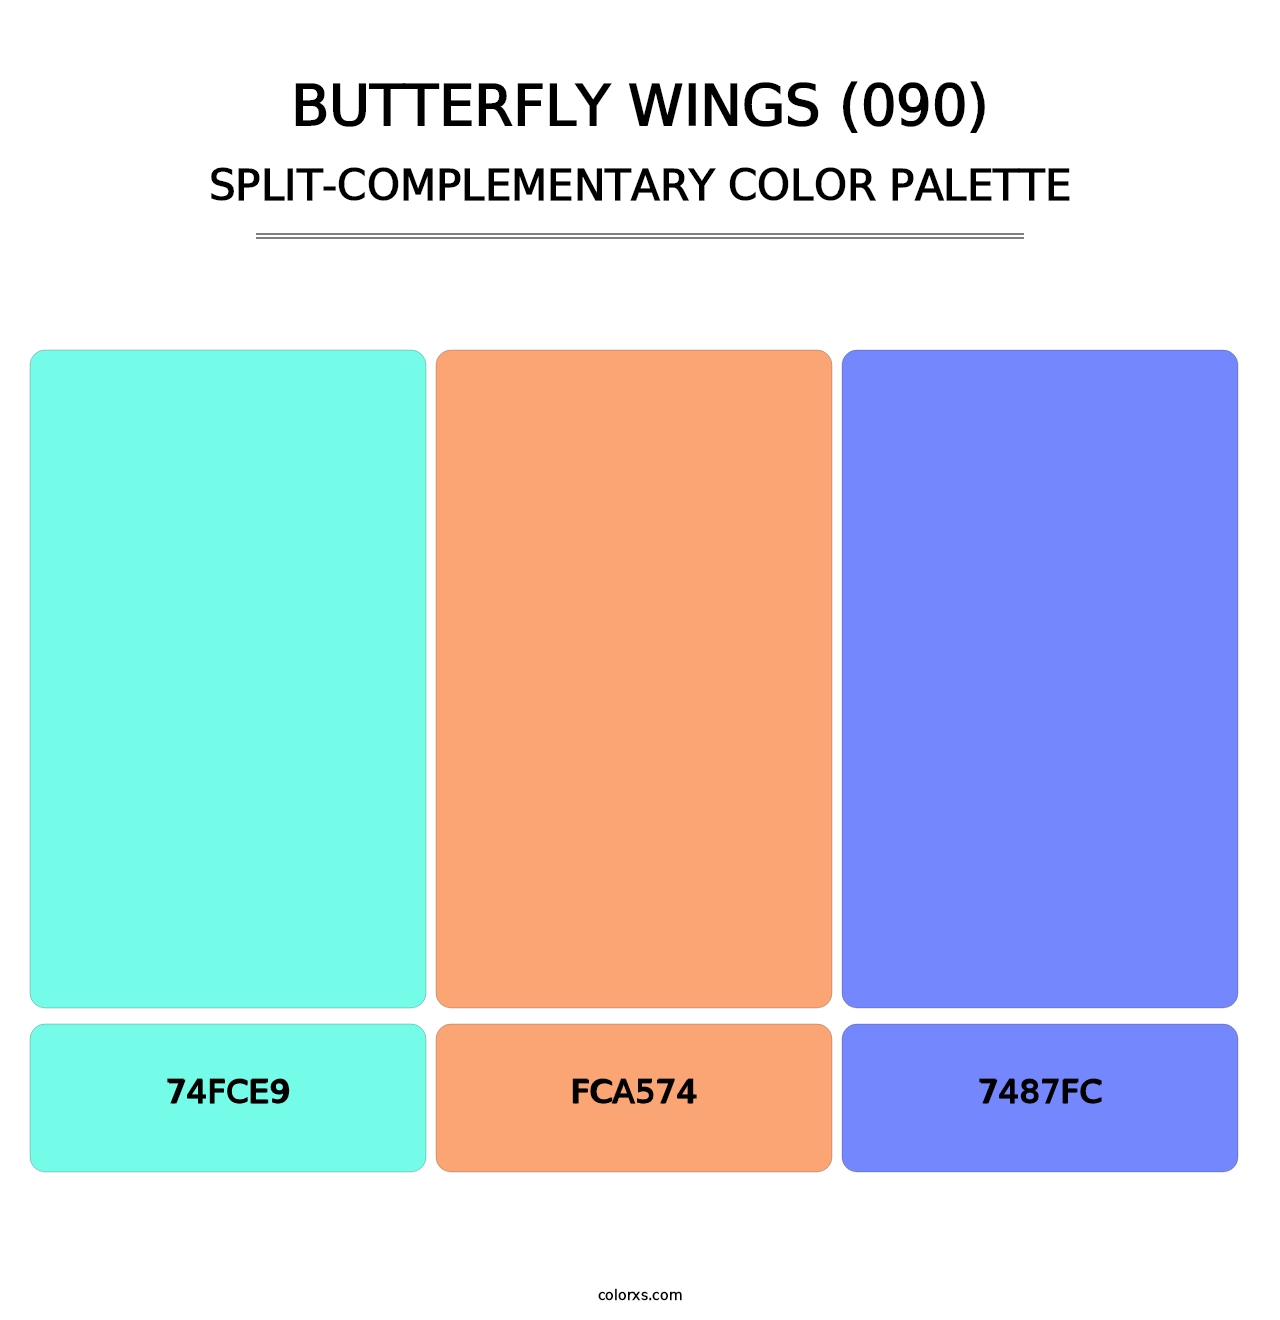 Butterfly Wings (090) - Split-Complementary Color Palette